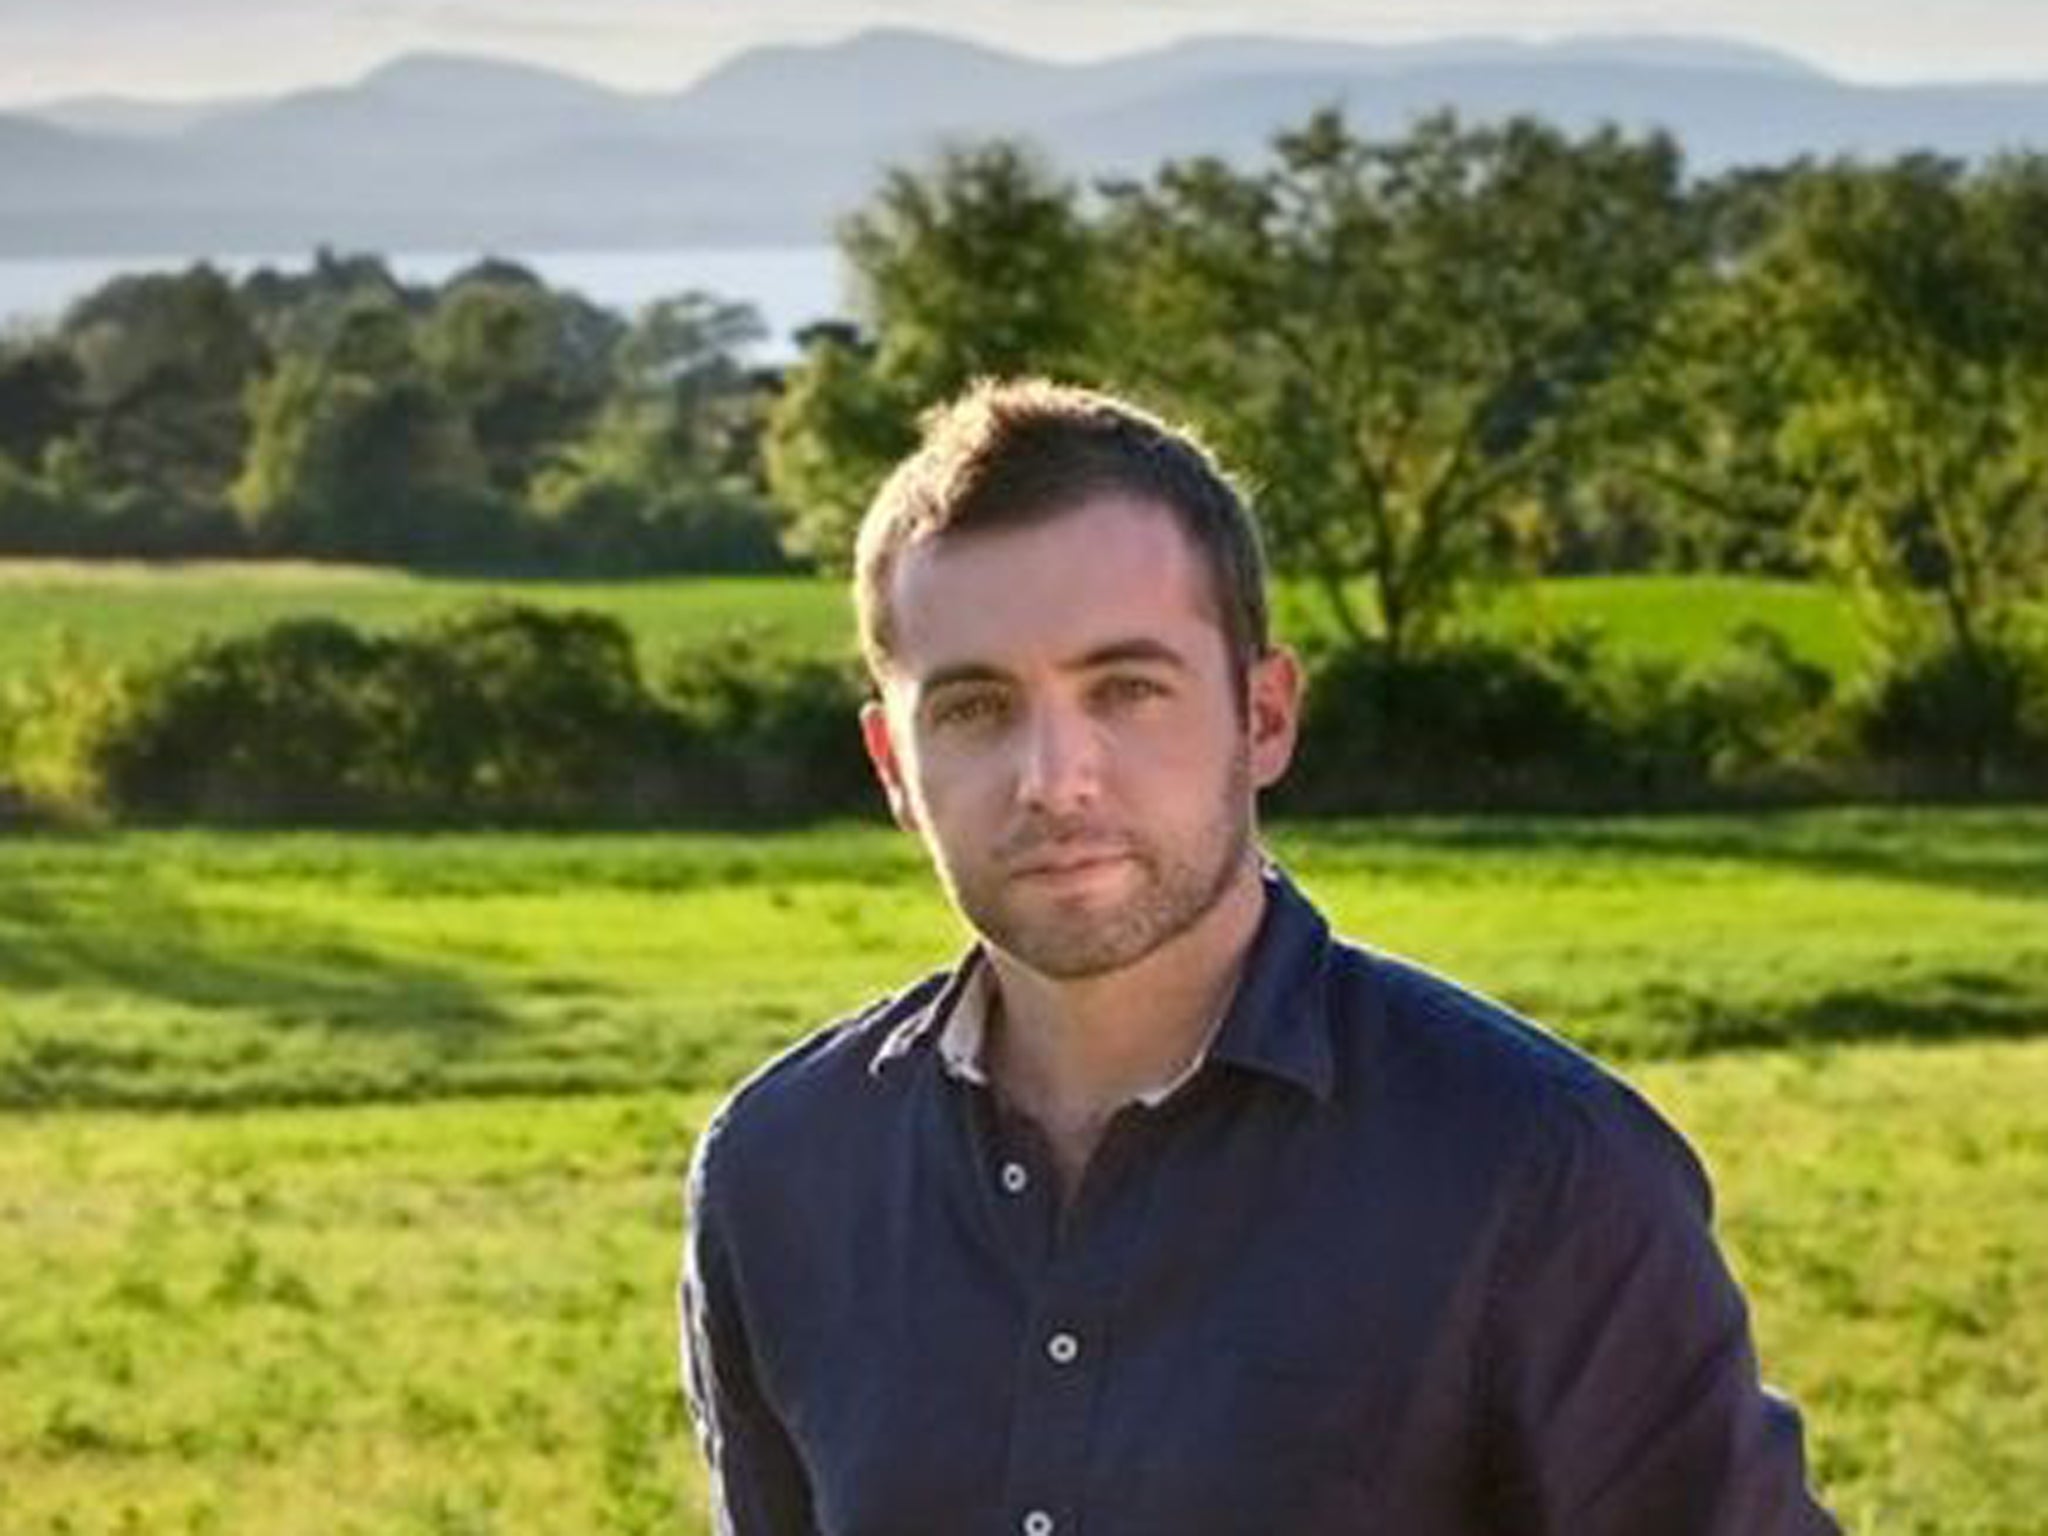 BuzzFeed reporter Michael Hastings, whose 2010 Rolling Stone magazine profile of the US military chief in Afghanistan, Stanley McChrystal, led to the general being relieved of command